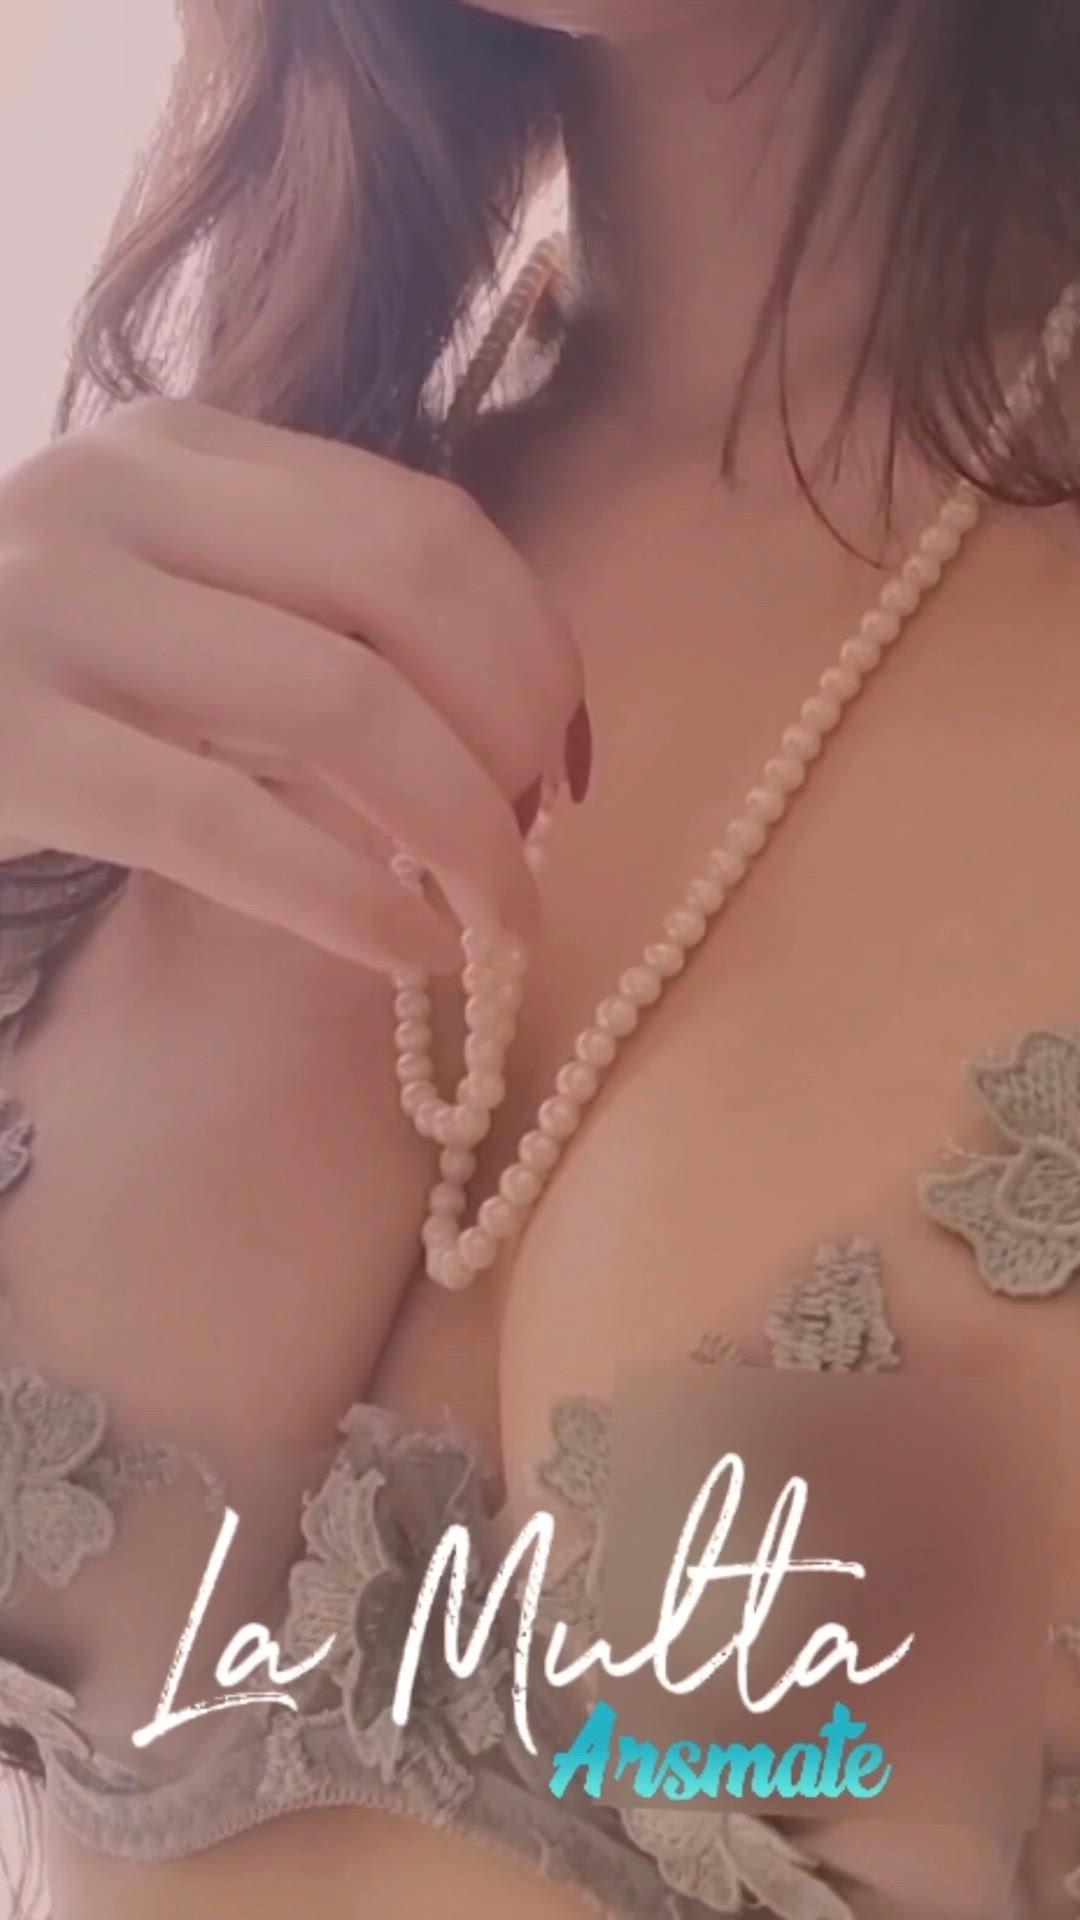 Boobs porn video with onlyfans model Ilêutopic <strong>@catalinayves</strong>